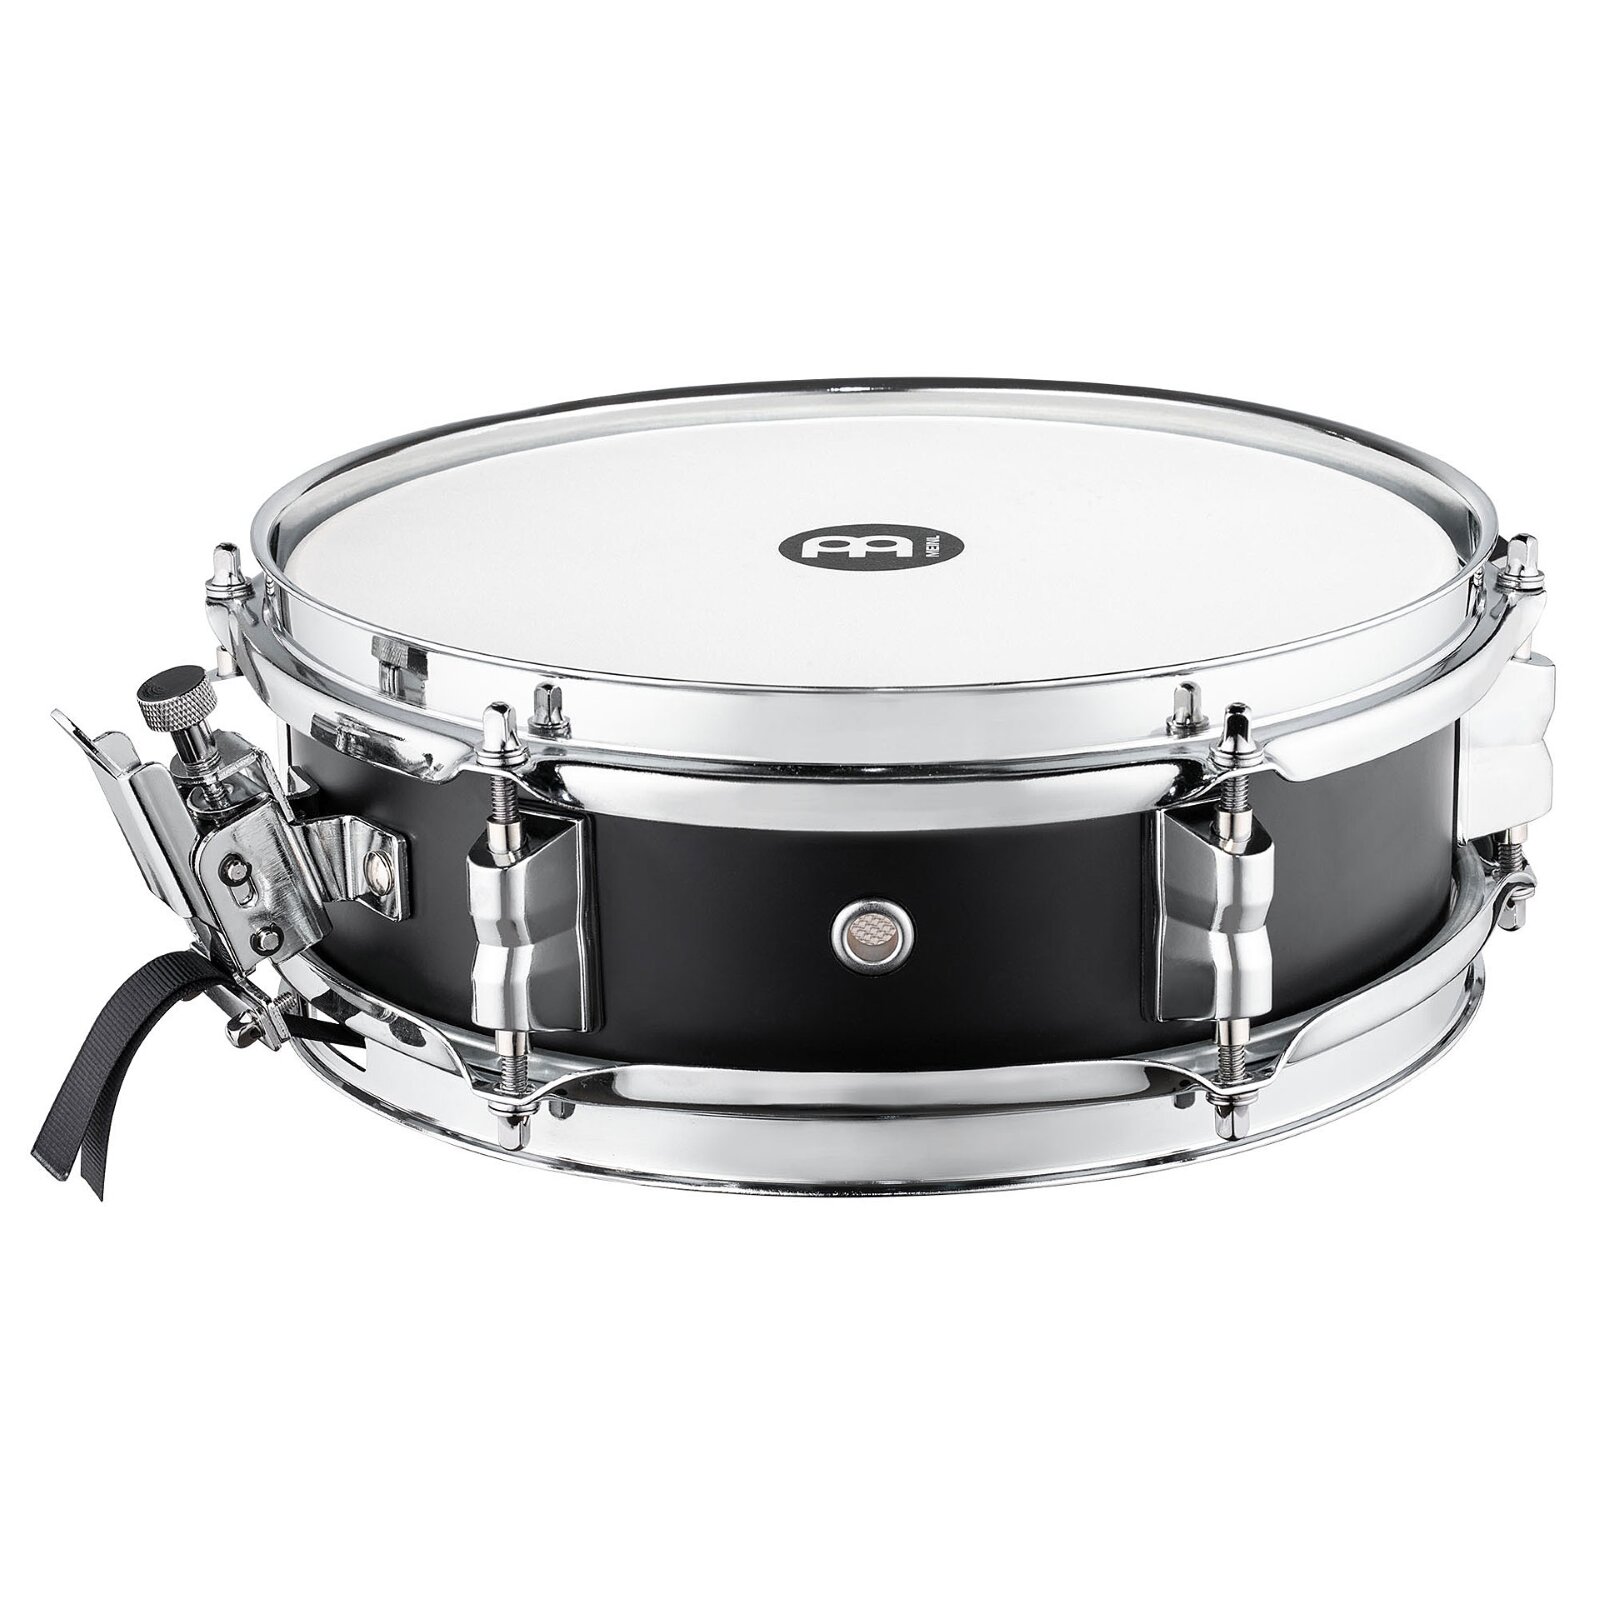 Meinl Compact Side Snare Drum (MPCSS) : photo 1